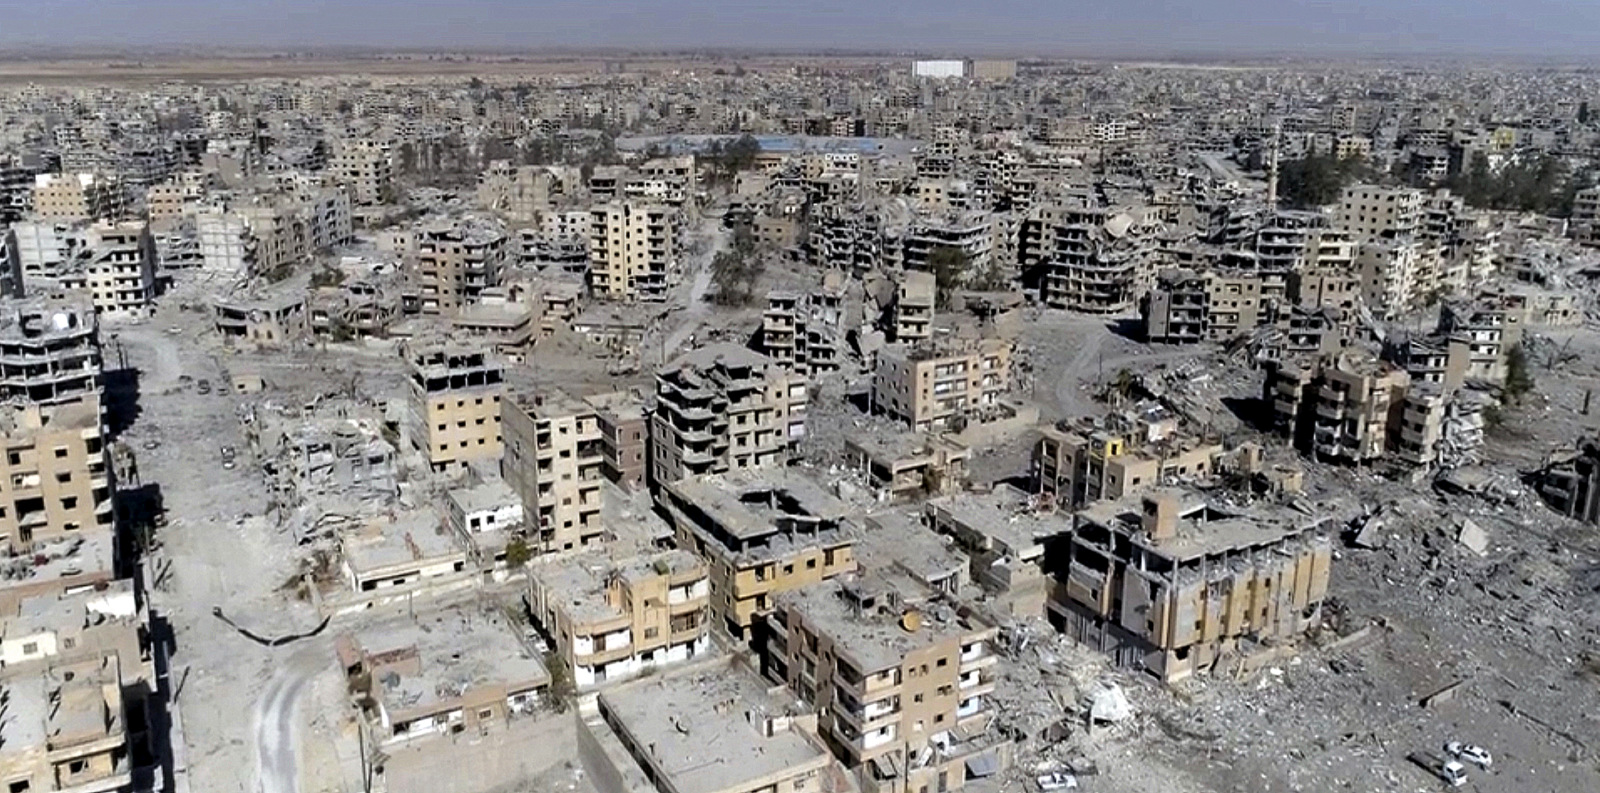 This Thursday, Oct. 19, 2017 frame grab made from drone video shows damaged buildings in Raqqa, Syria, two days after Syrian Democratic Forces said that military operations to oust ISIS have ended and that their fighters have taken full control of the city. (AP/ Gabriel Chaim)